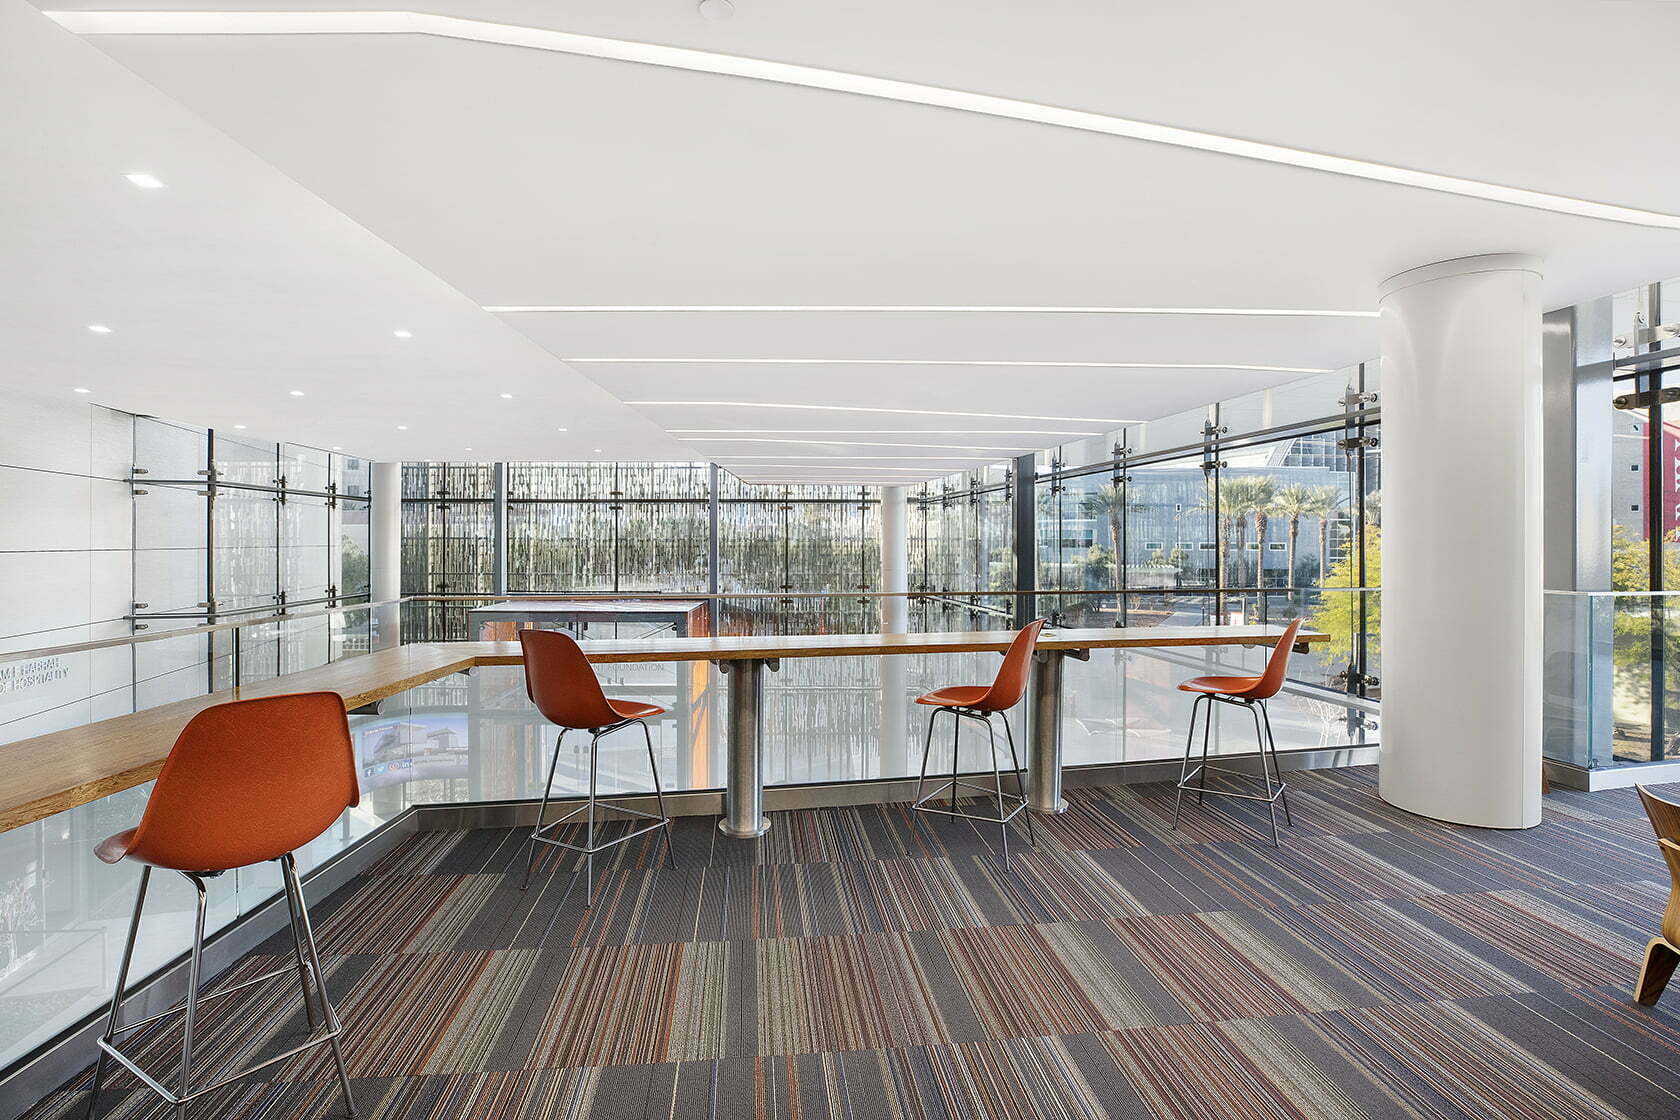 Top floor at the new hospitality hall of UNLV, USA